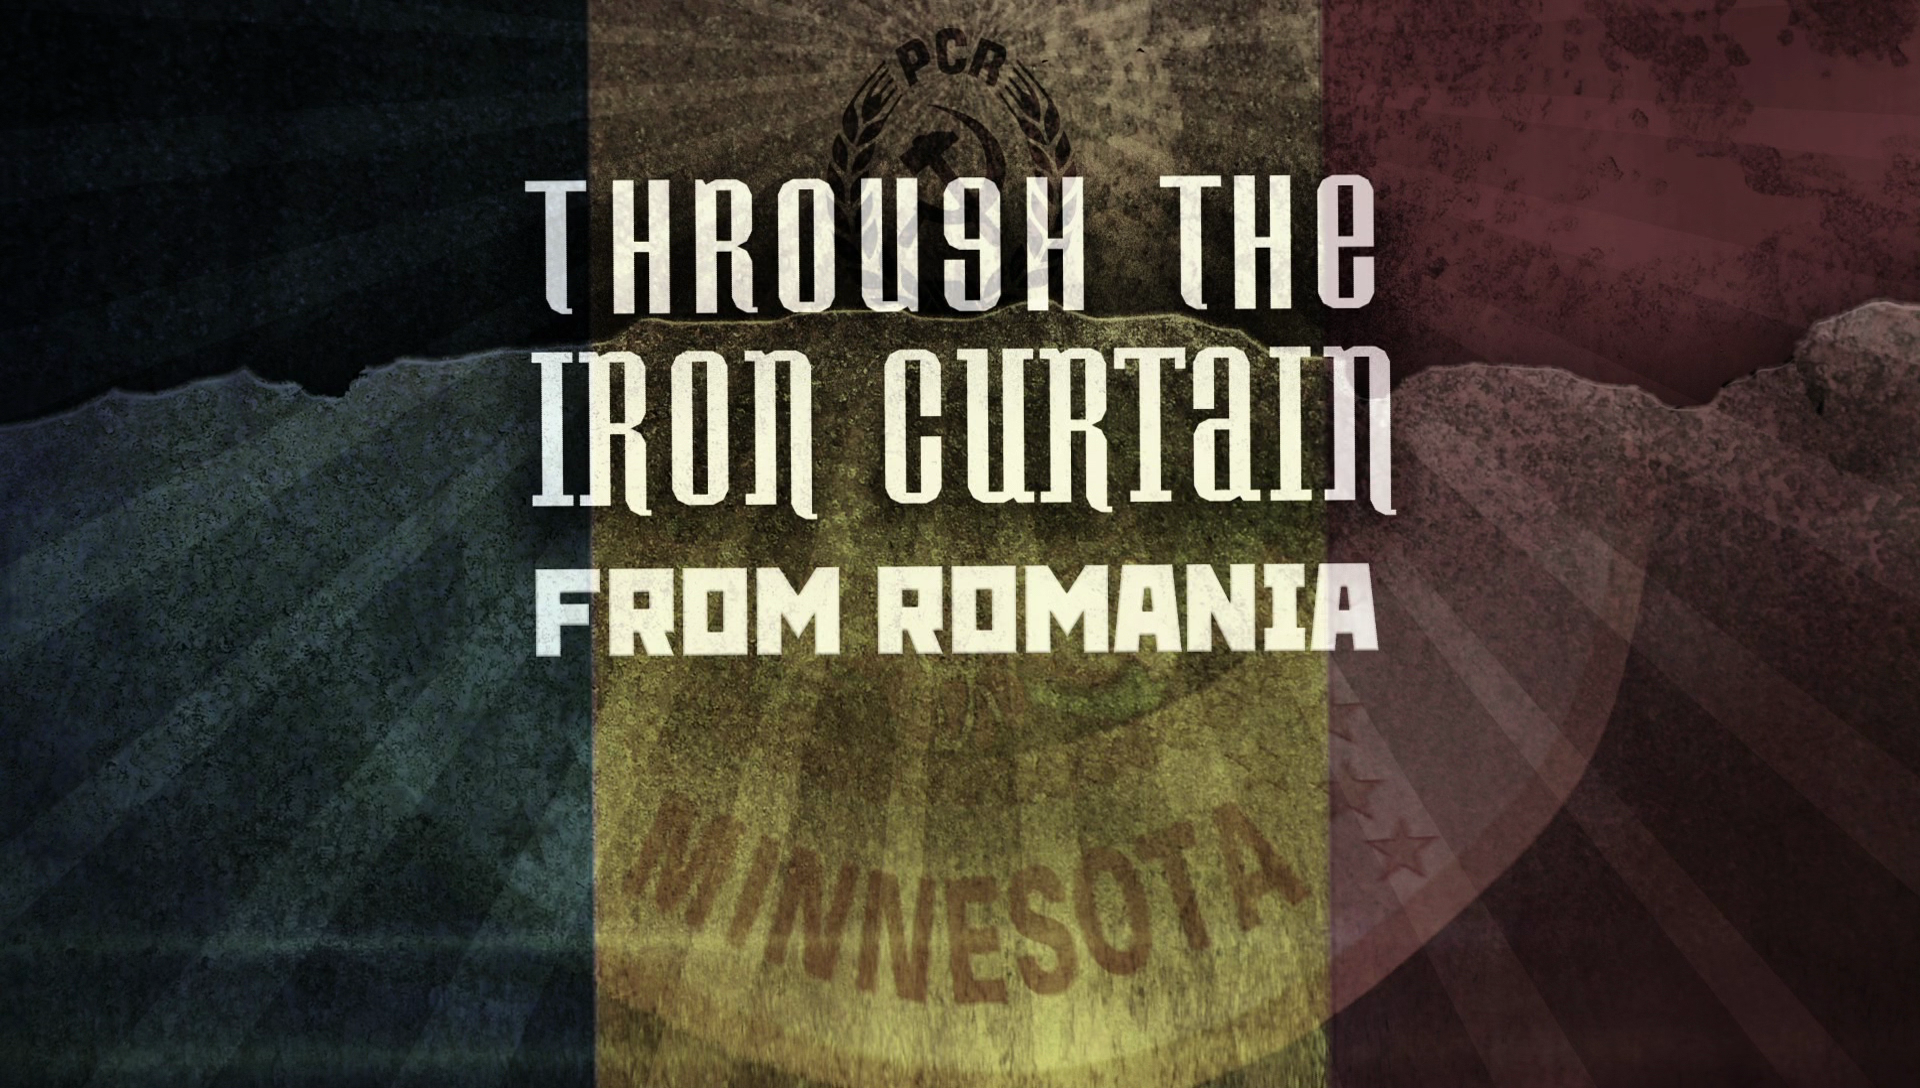 Upcoming – Heritage Organization of Romanian Americans in Minnesota